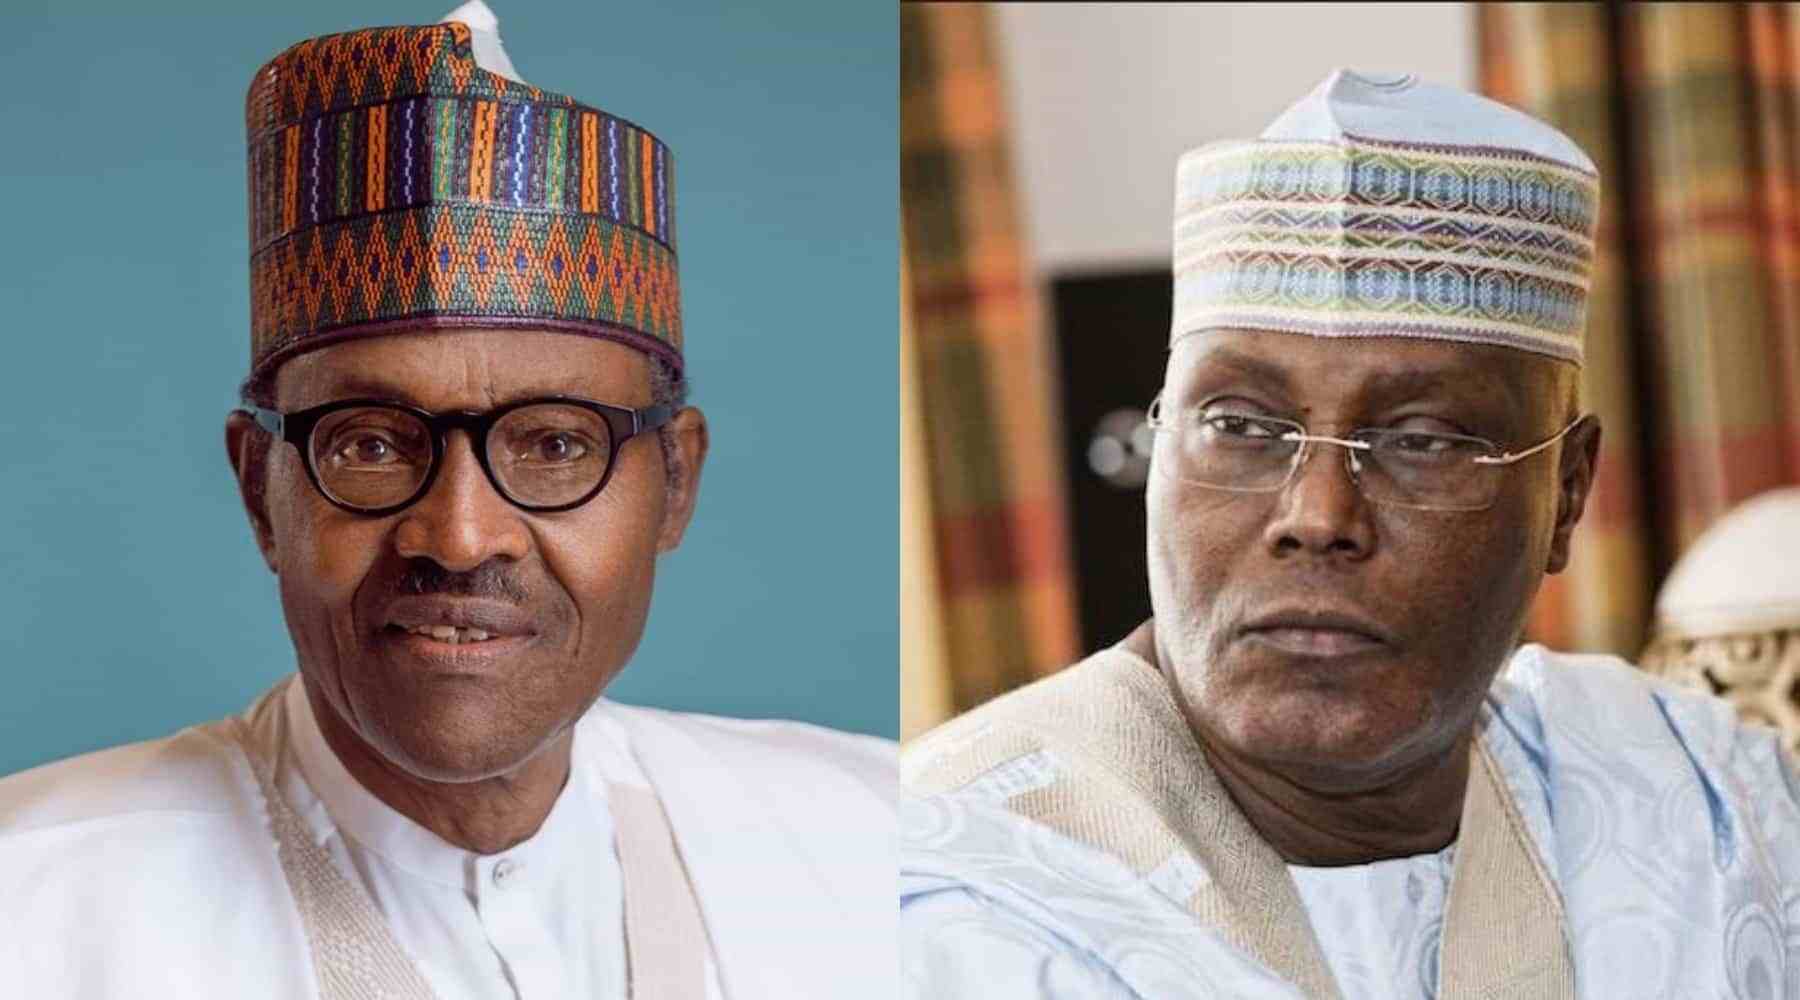 Presidential Election Tribunal: We have proof that Buhari does not have a WAEC certificate – Atiku,PDP